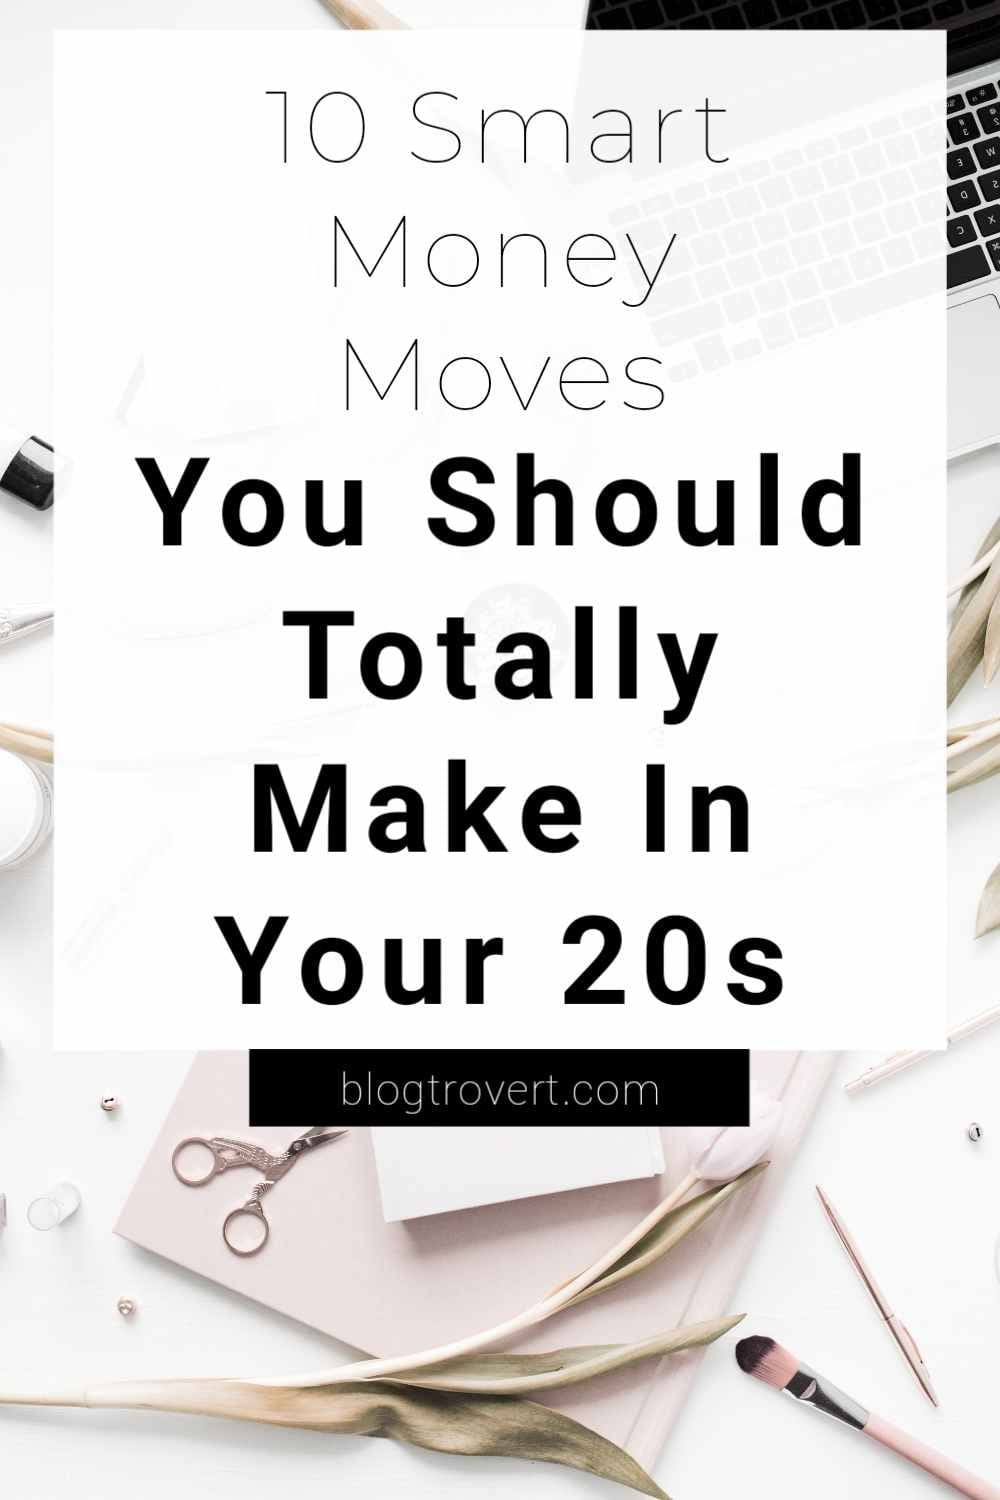 10 Smart Money Moves to Make in Your 20s for a better future 6